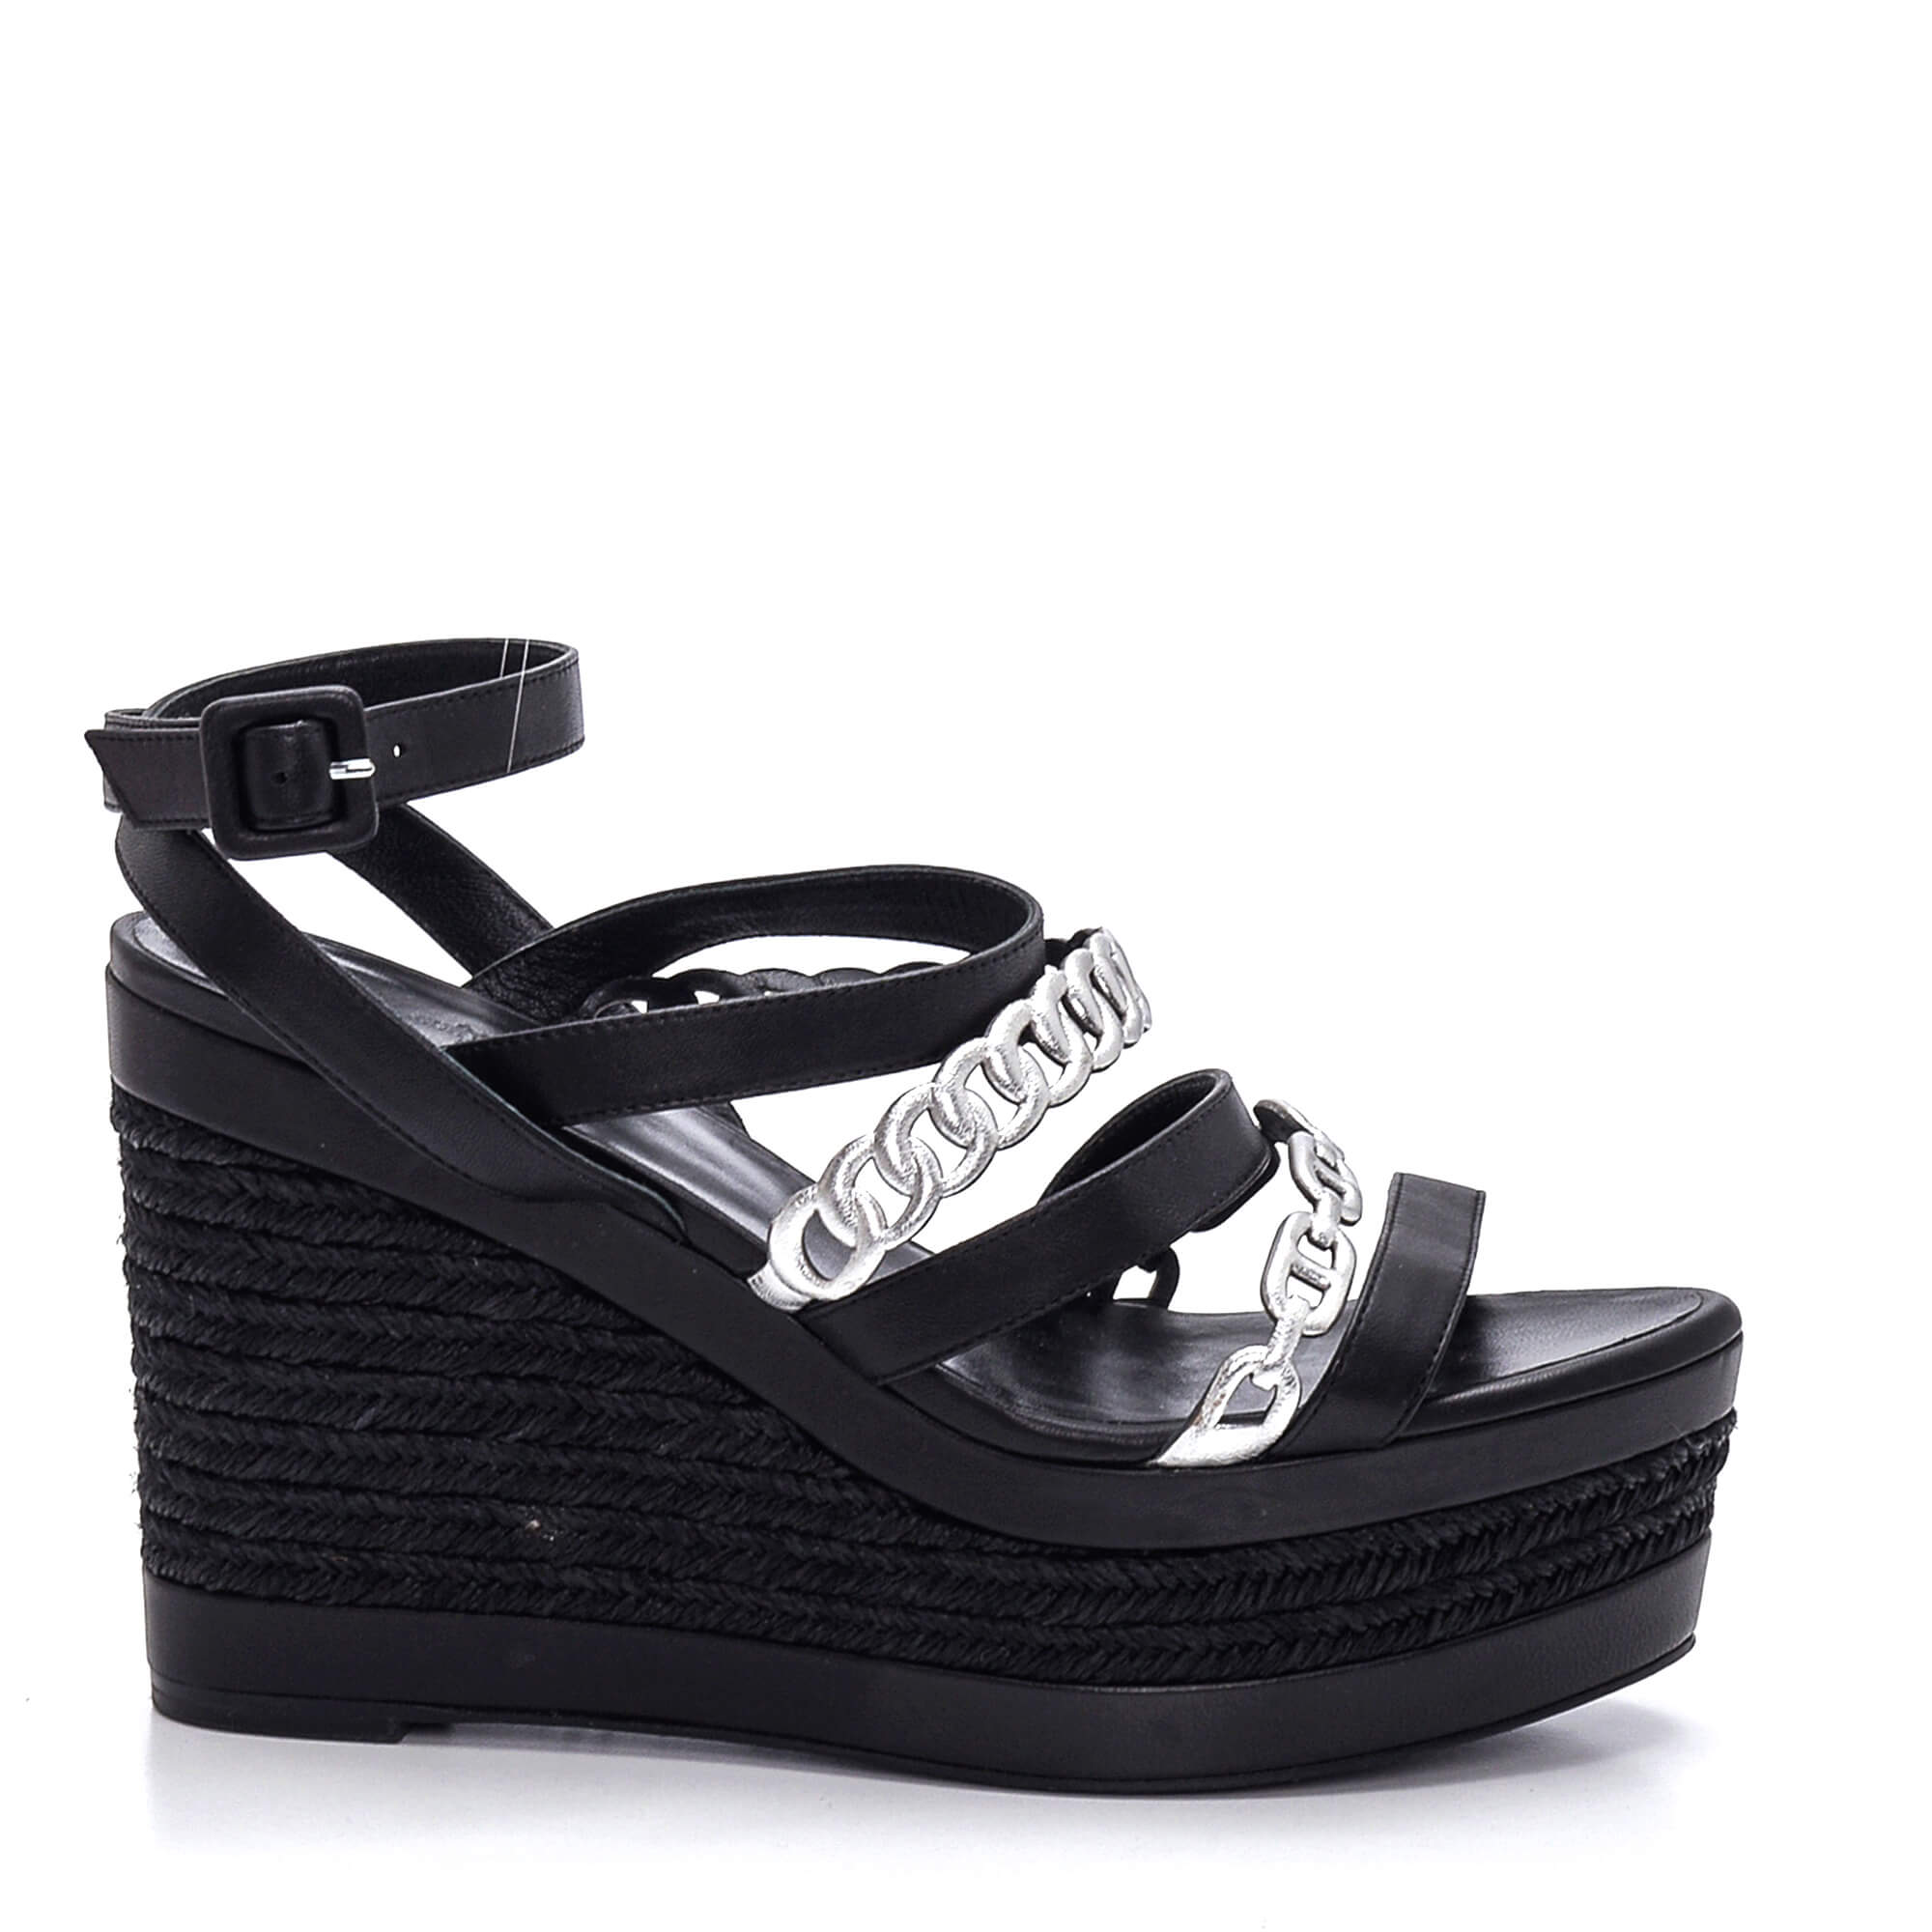 Hermes - Black / Silver Leather Chain Wedge Espadrilles 